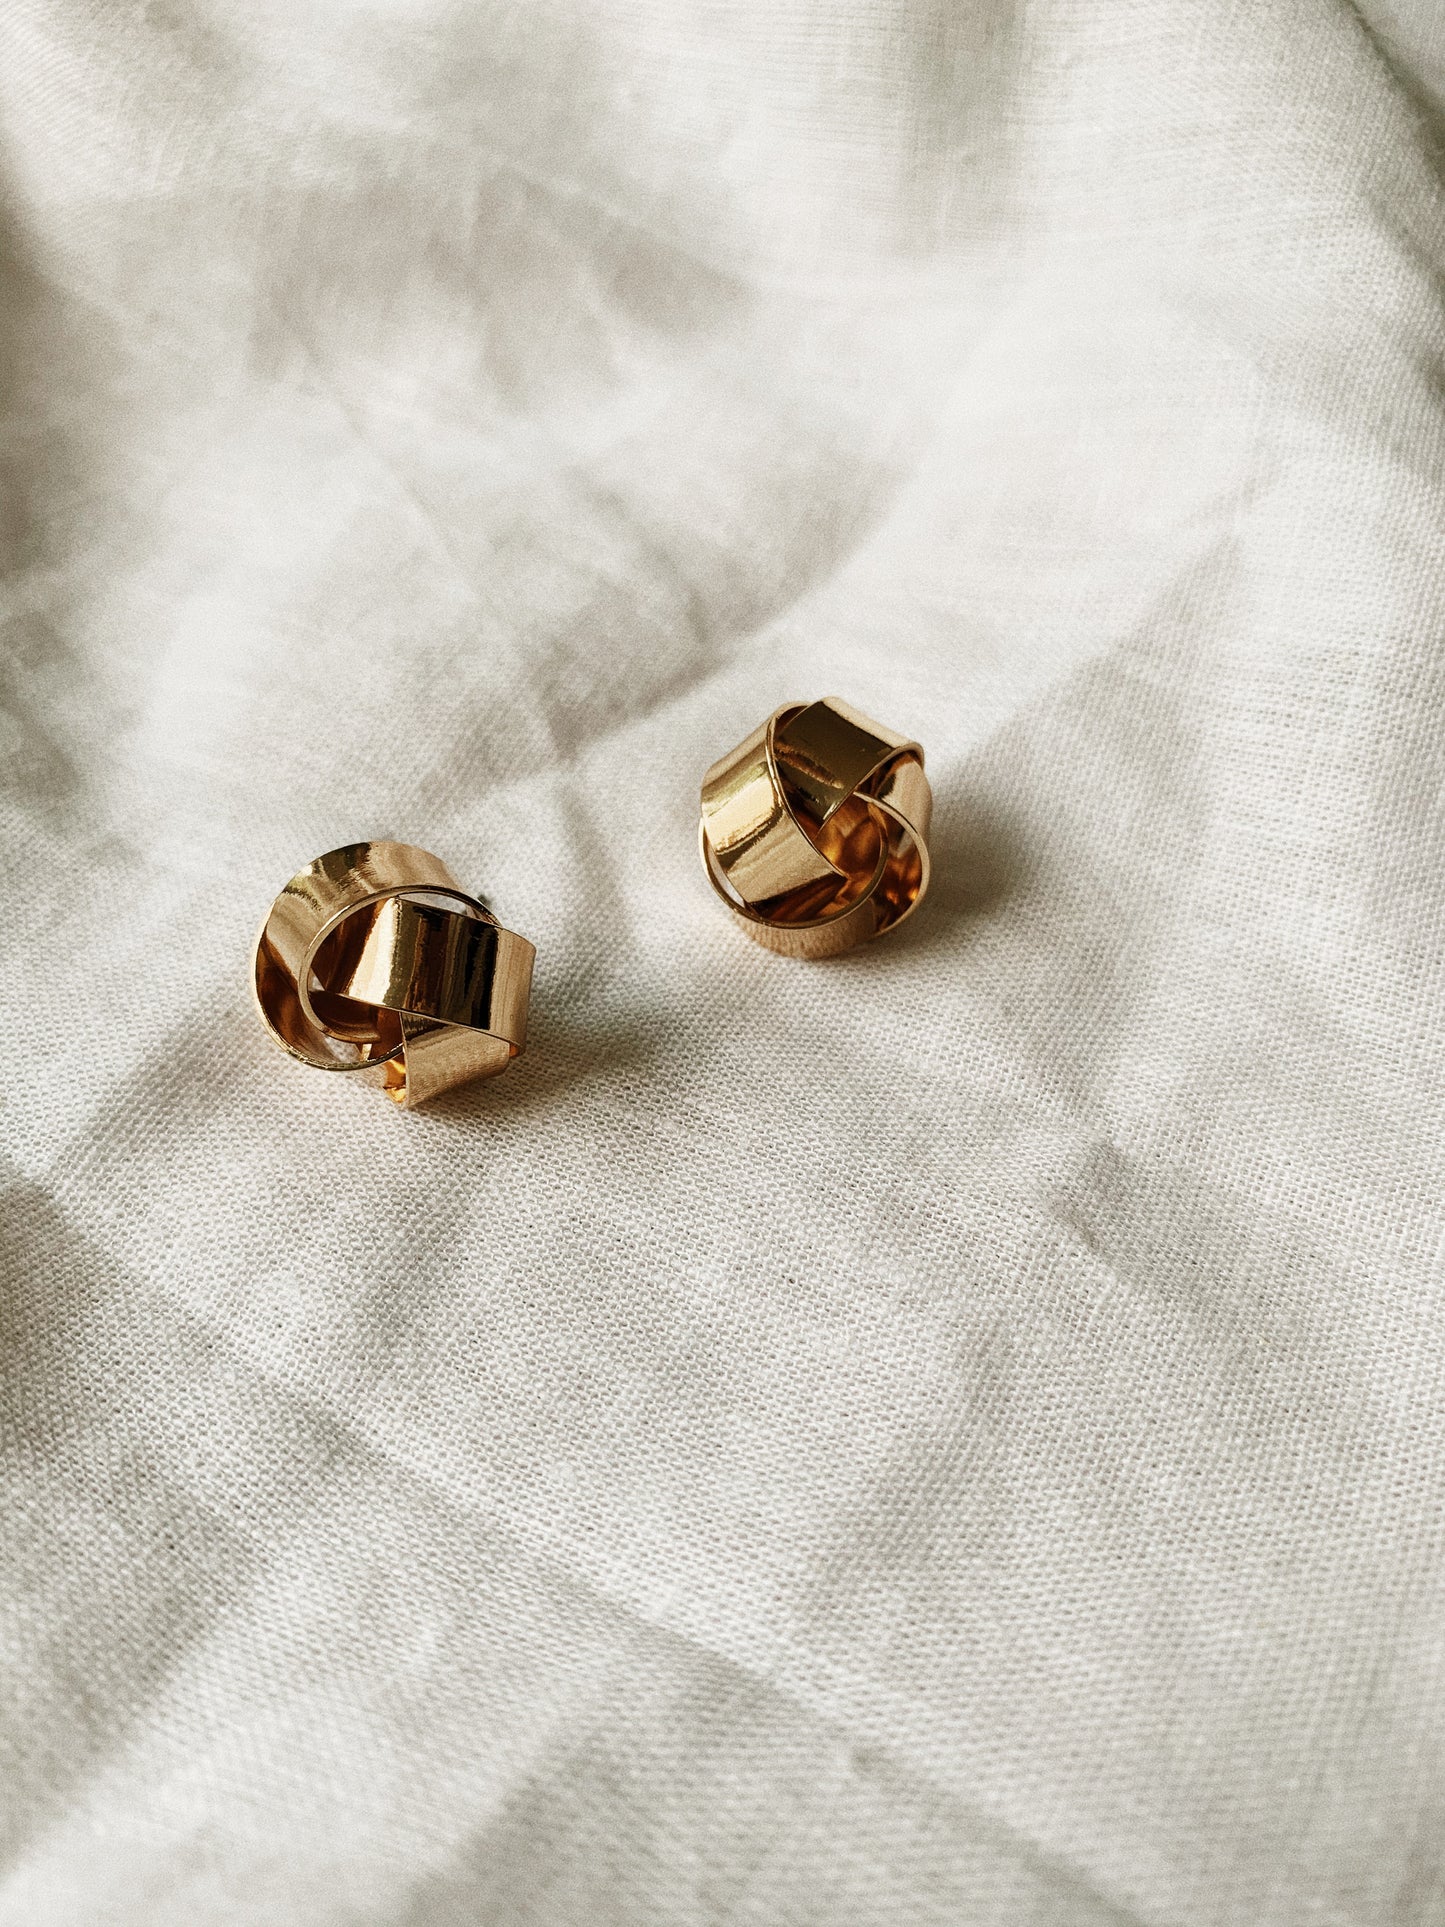 Modern World Round Gold Stud Earrings | By: Life in the sun store